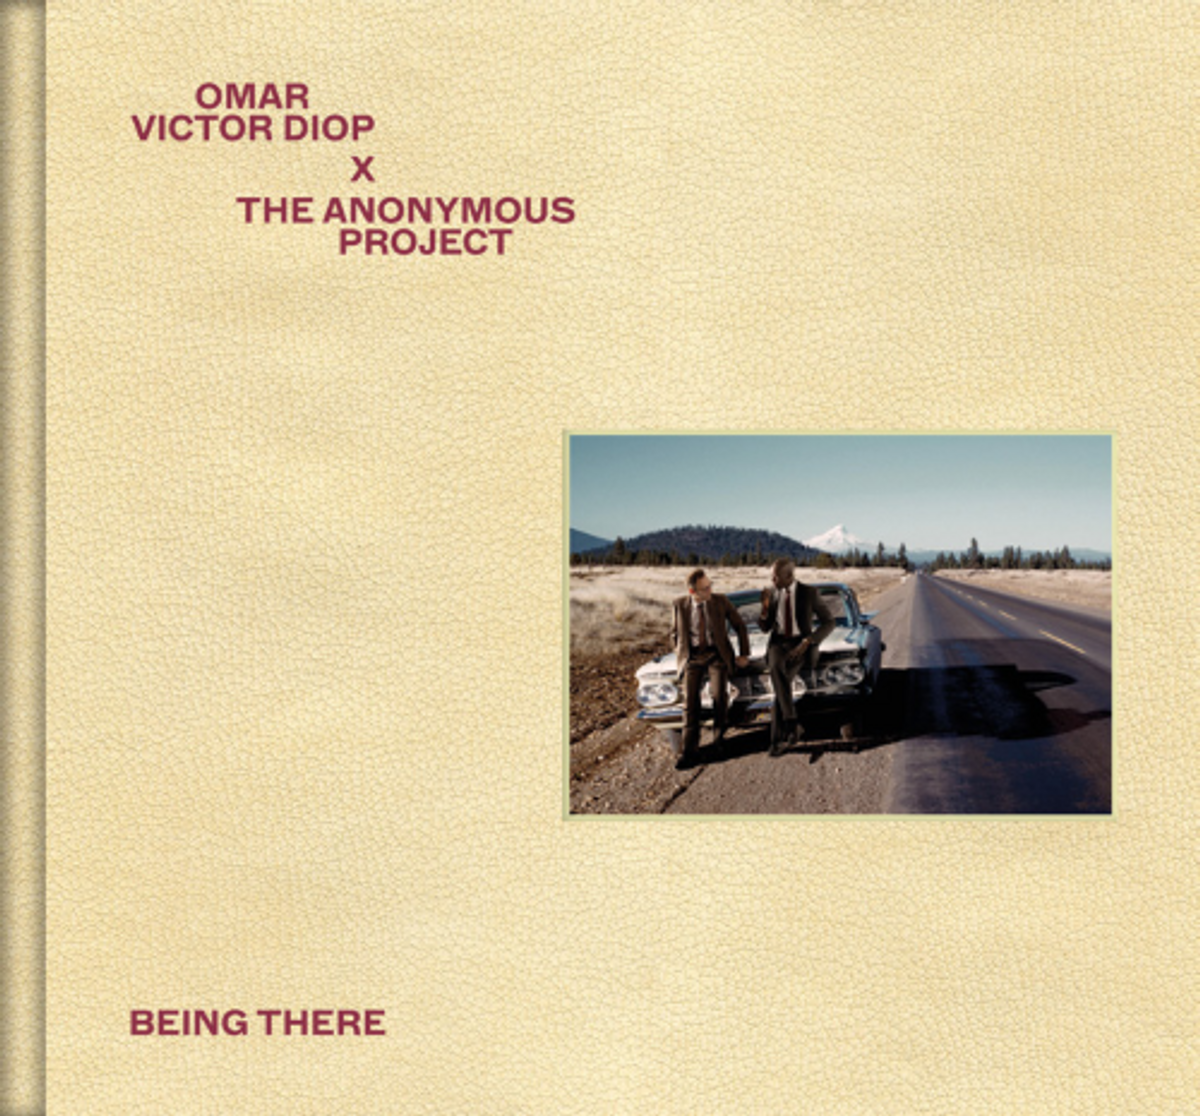 Omar Victor Diop × The Anonymous Project, Being There, Paris, Textuel, 2023, 104 pages, 49 euros.